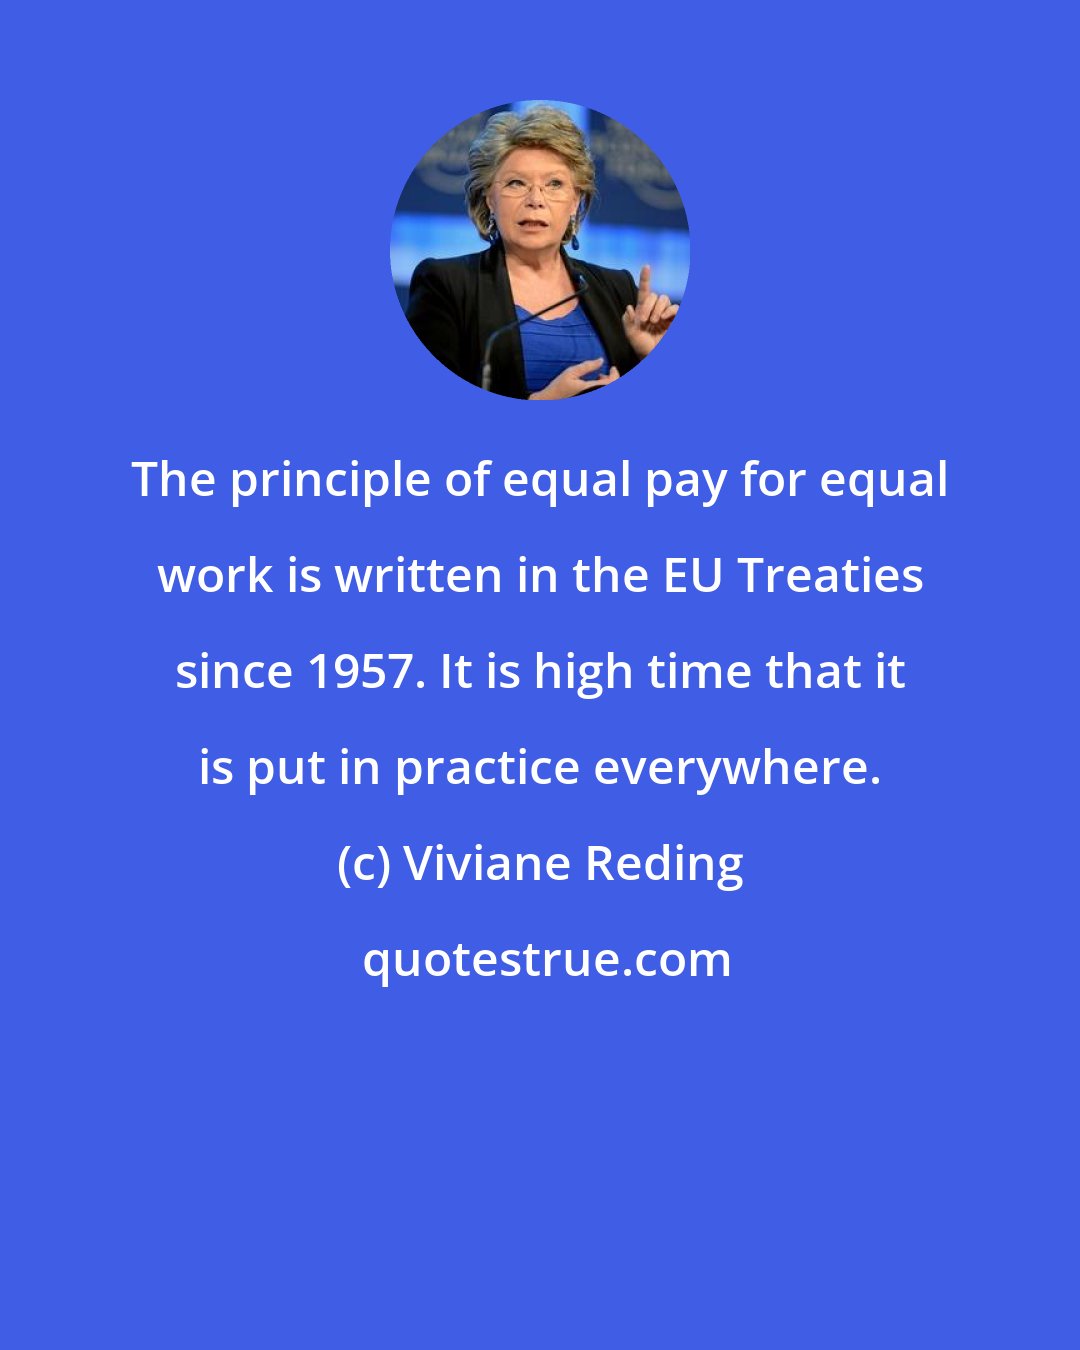 Viviane Reding: The principle of equal pay for equal work is written in the EU Treaties since 1957. It is high time that it is put in practice everywhere.